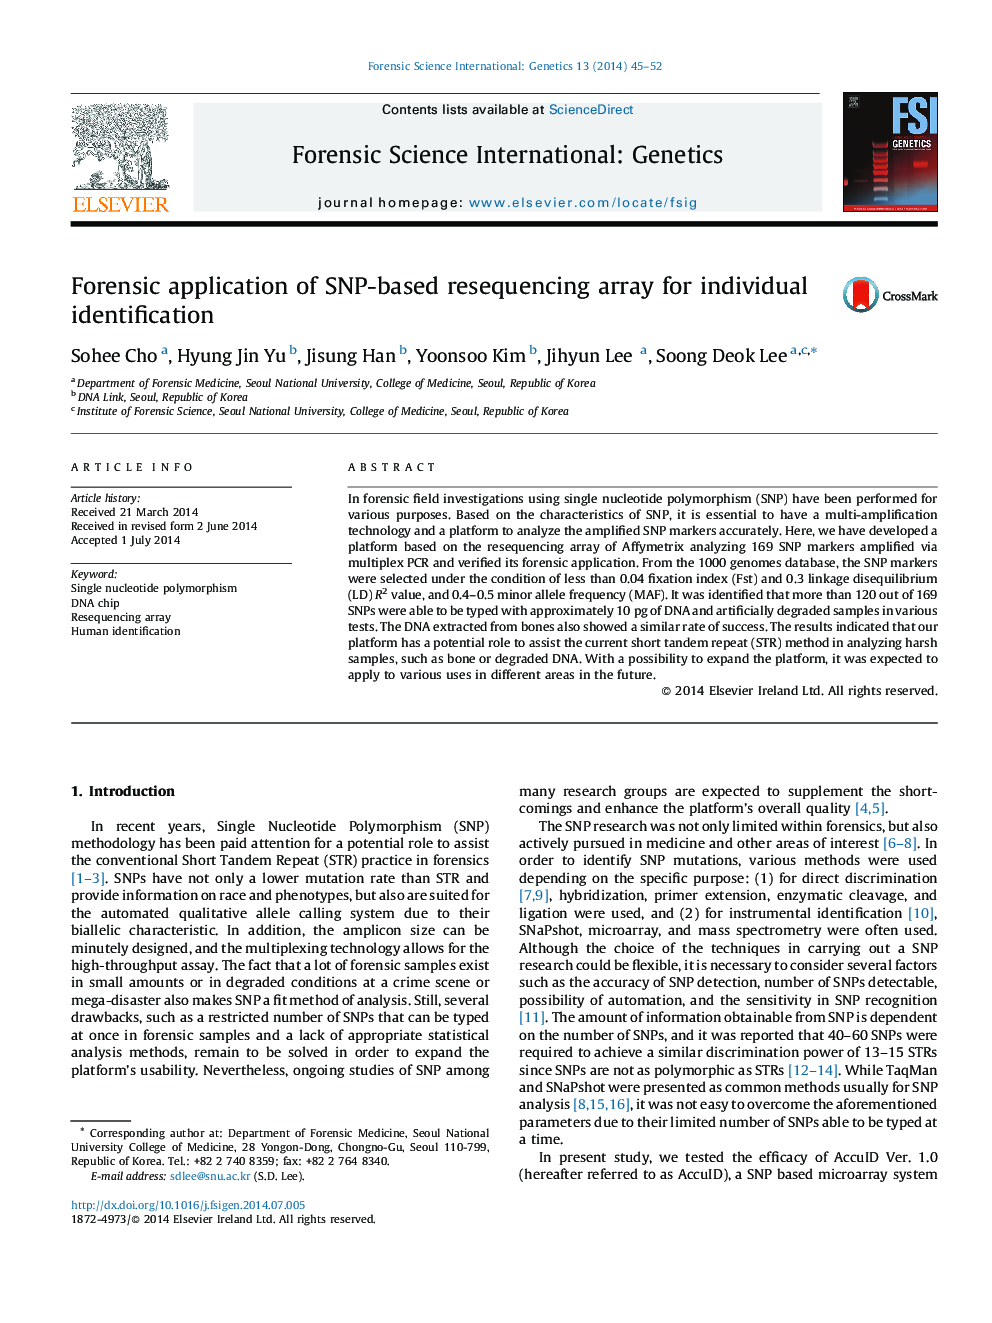 Forensic application of SNP-based resequencing array for individual identification